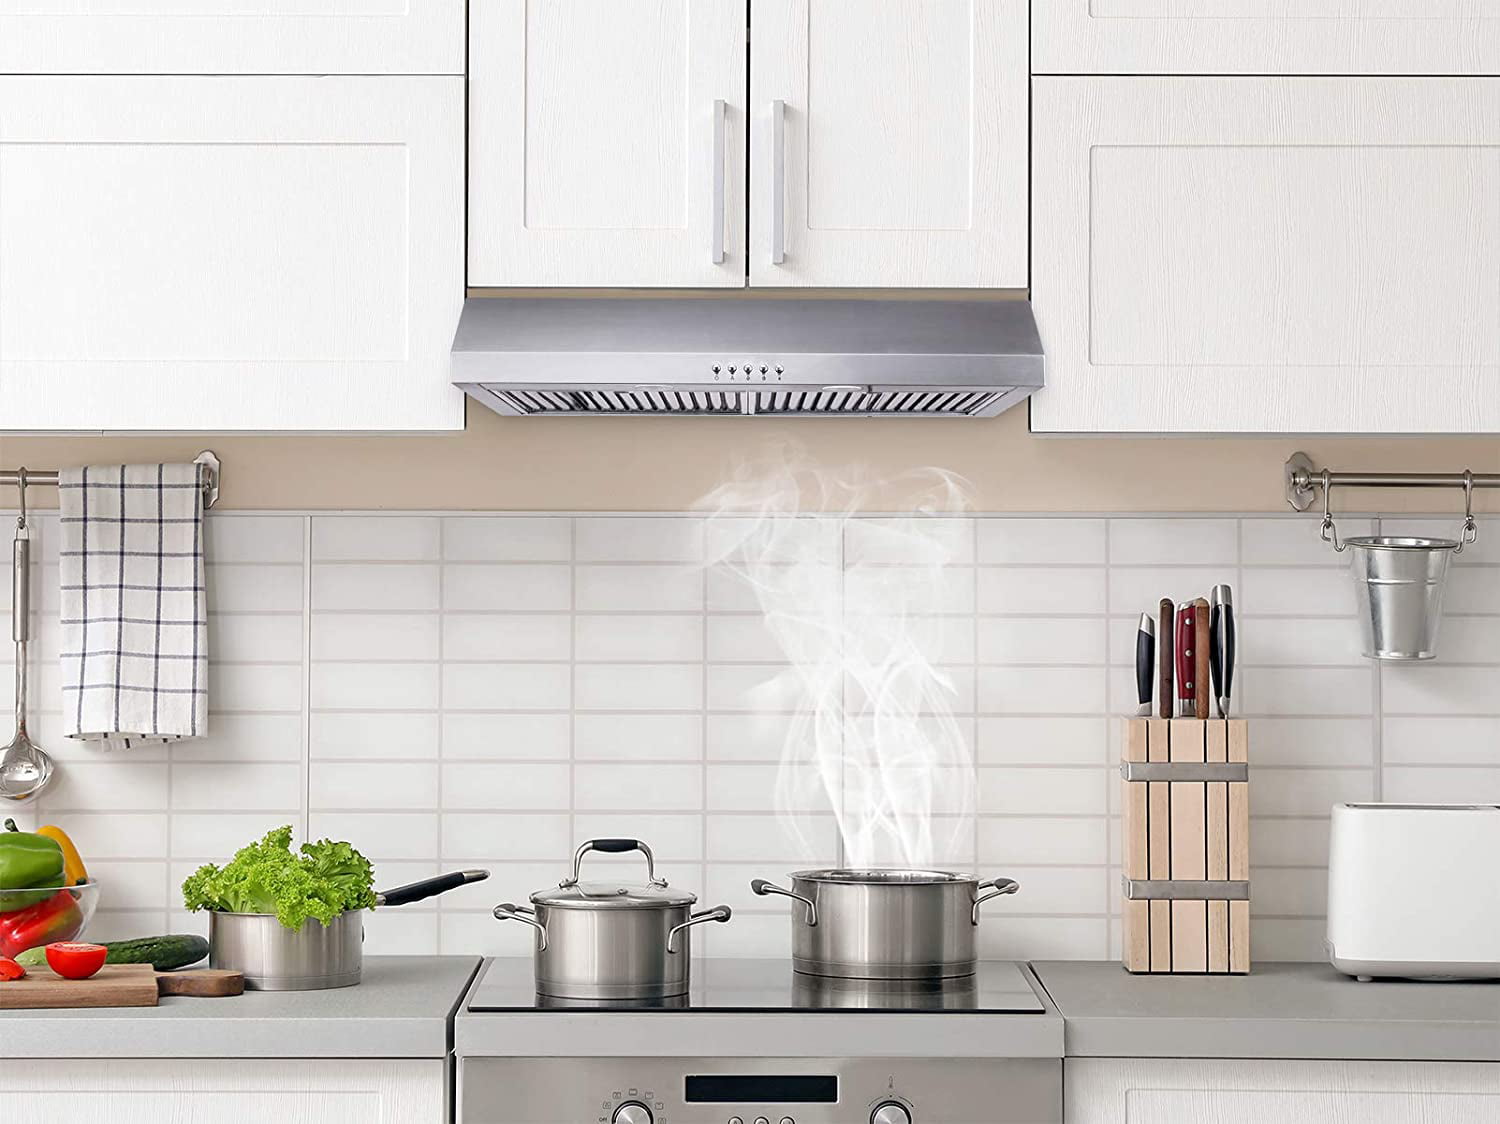 Under Cabinet Range Hood 30 in Stainless Steel Ductless Non-Vented Kitchen Stove 